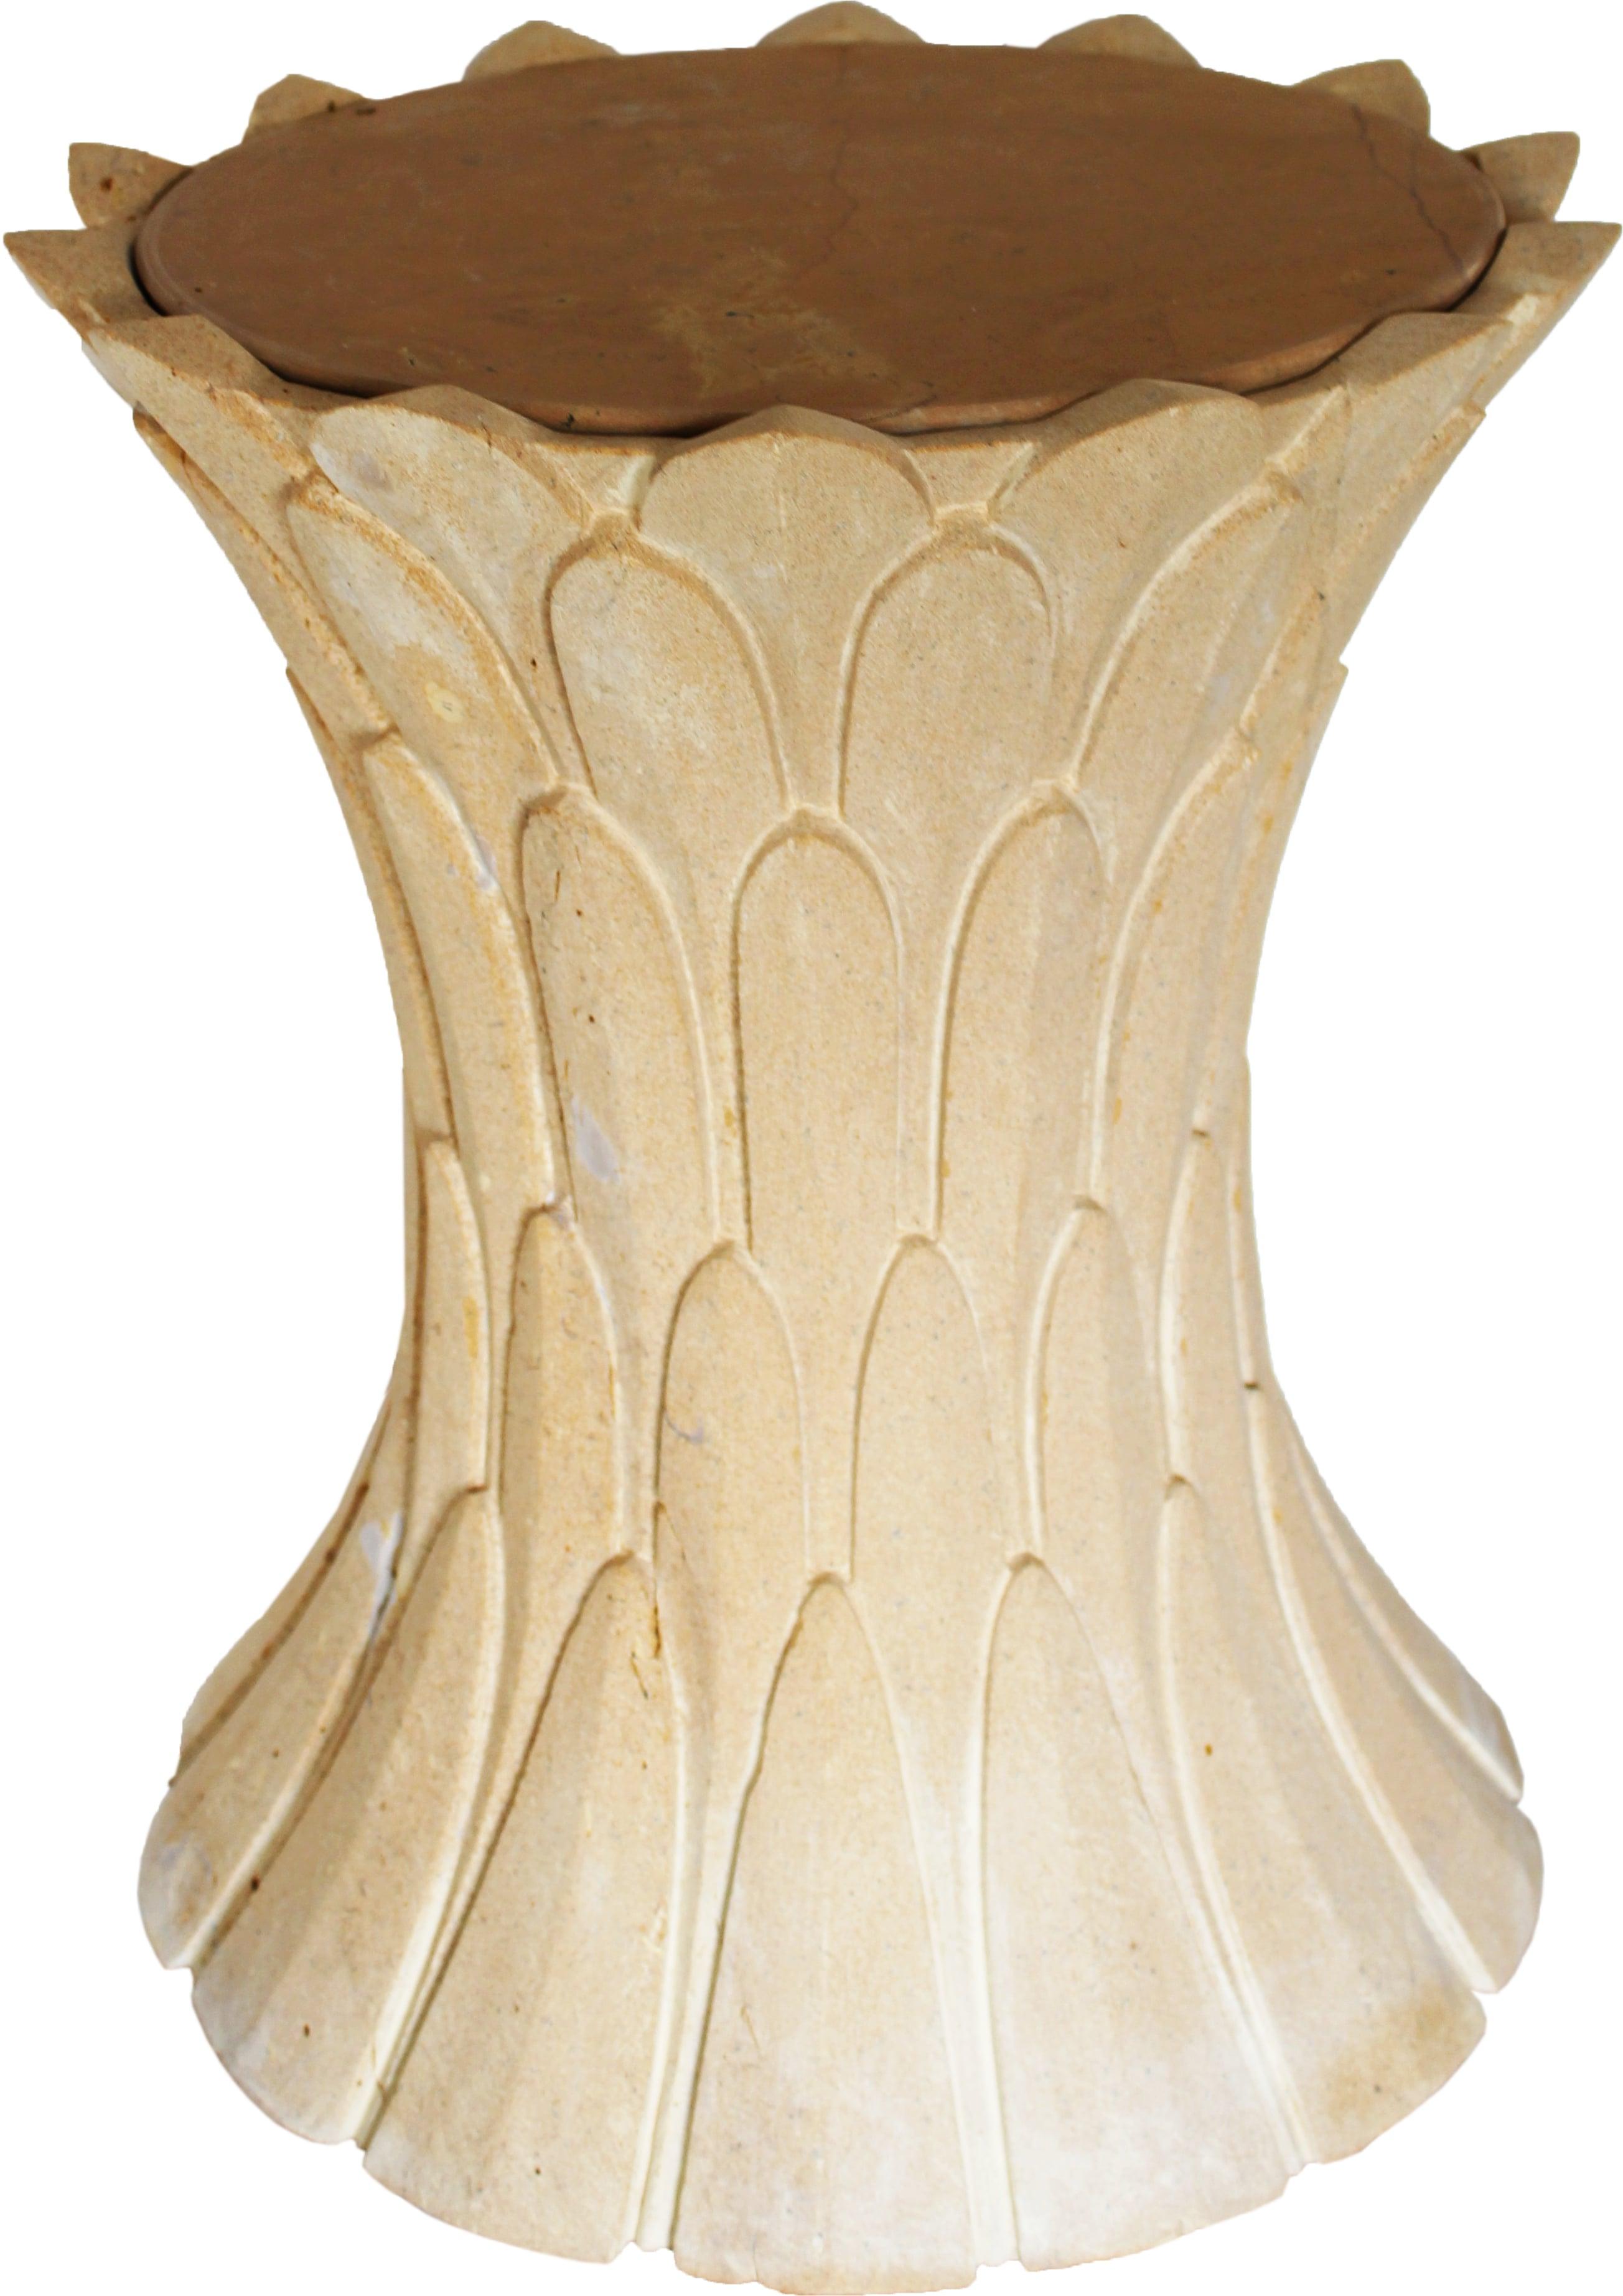 Inspired by the temple carvings in and around Udaipur, Stephanie Odegard designed this unique side table using locally available stones. The arrangement of the carved leaf motif is toned down to give a much lighter feel and appearance. 
 
Feathers